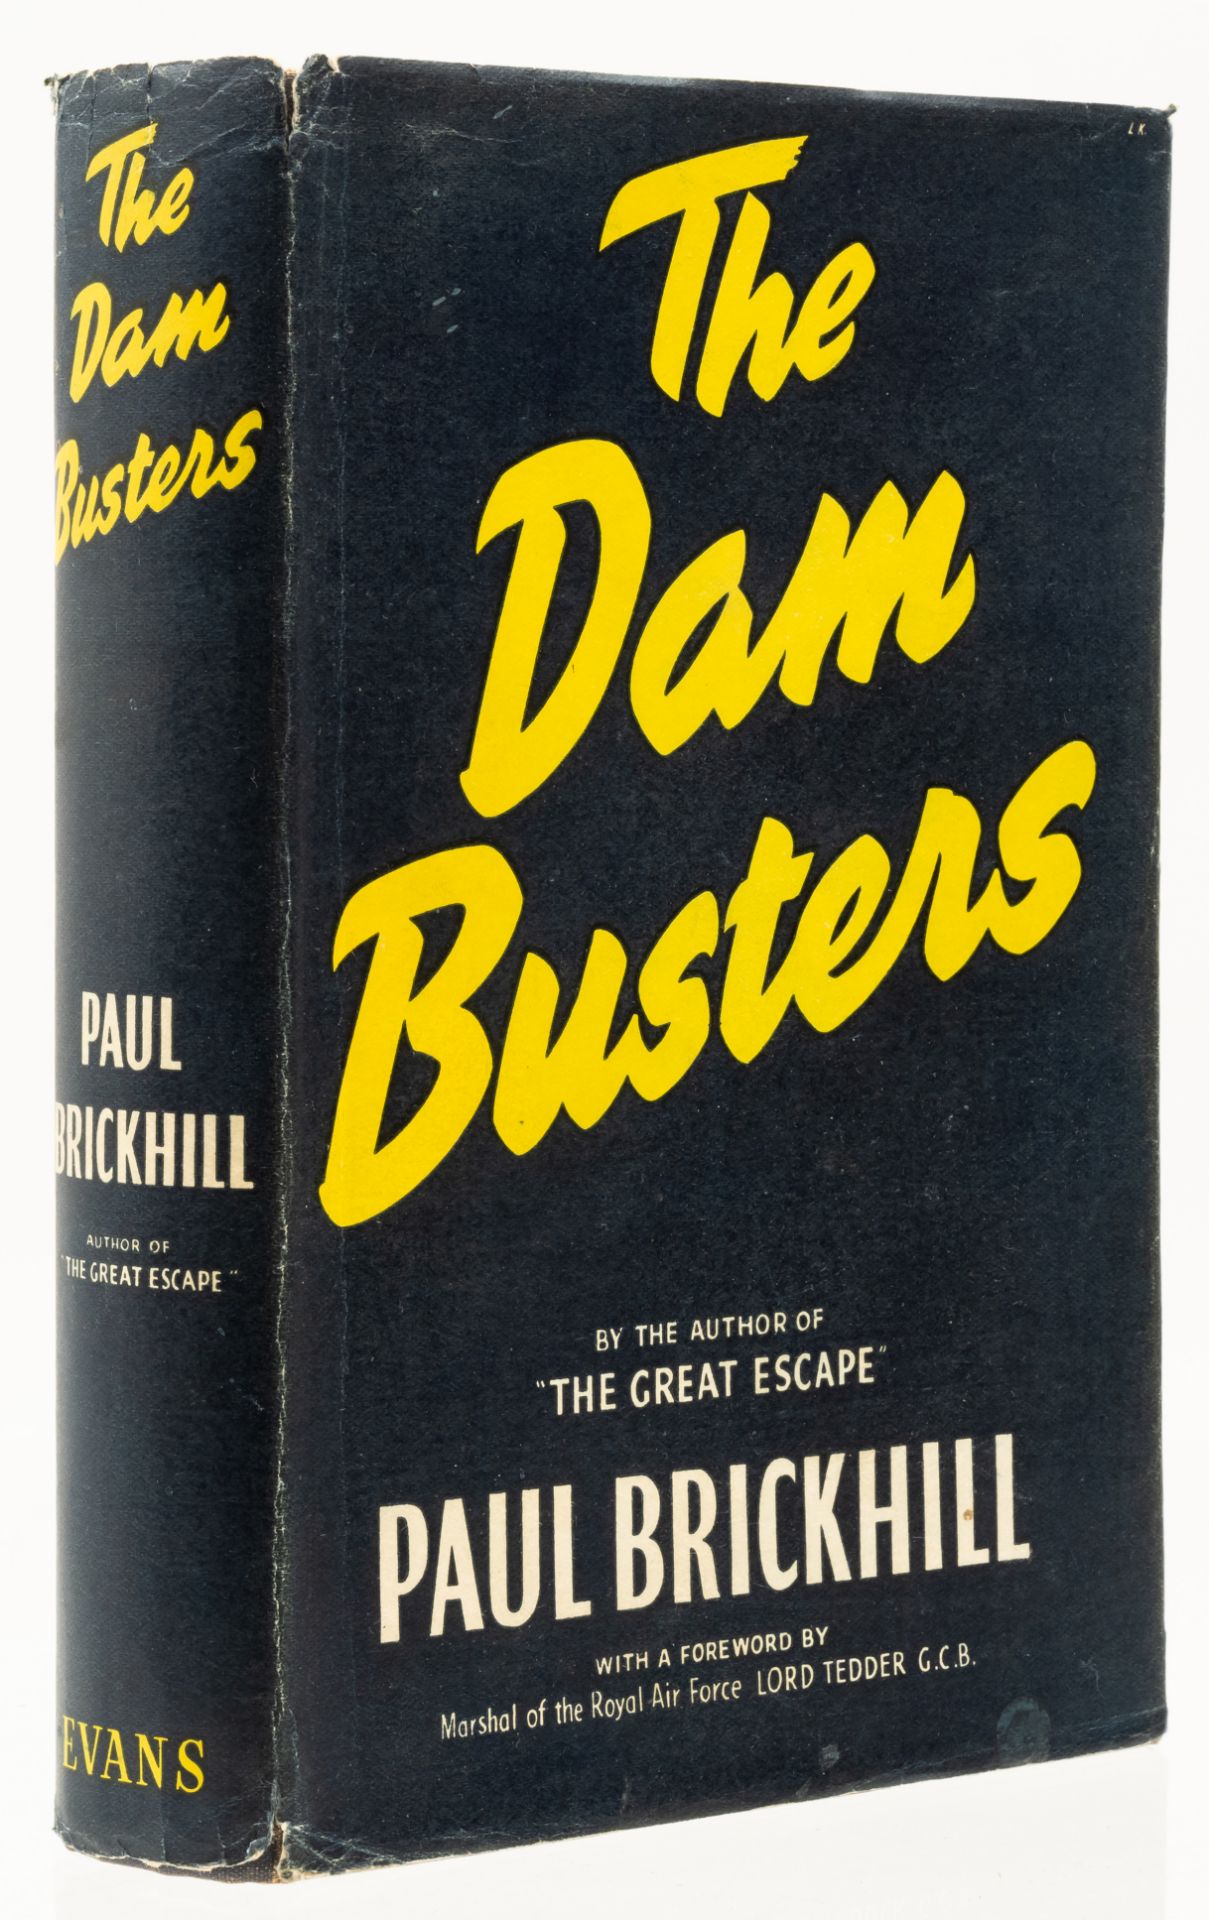 Brickhill (Paul) The Dam Busters, second impression, signed presentation inscription by the autho...